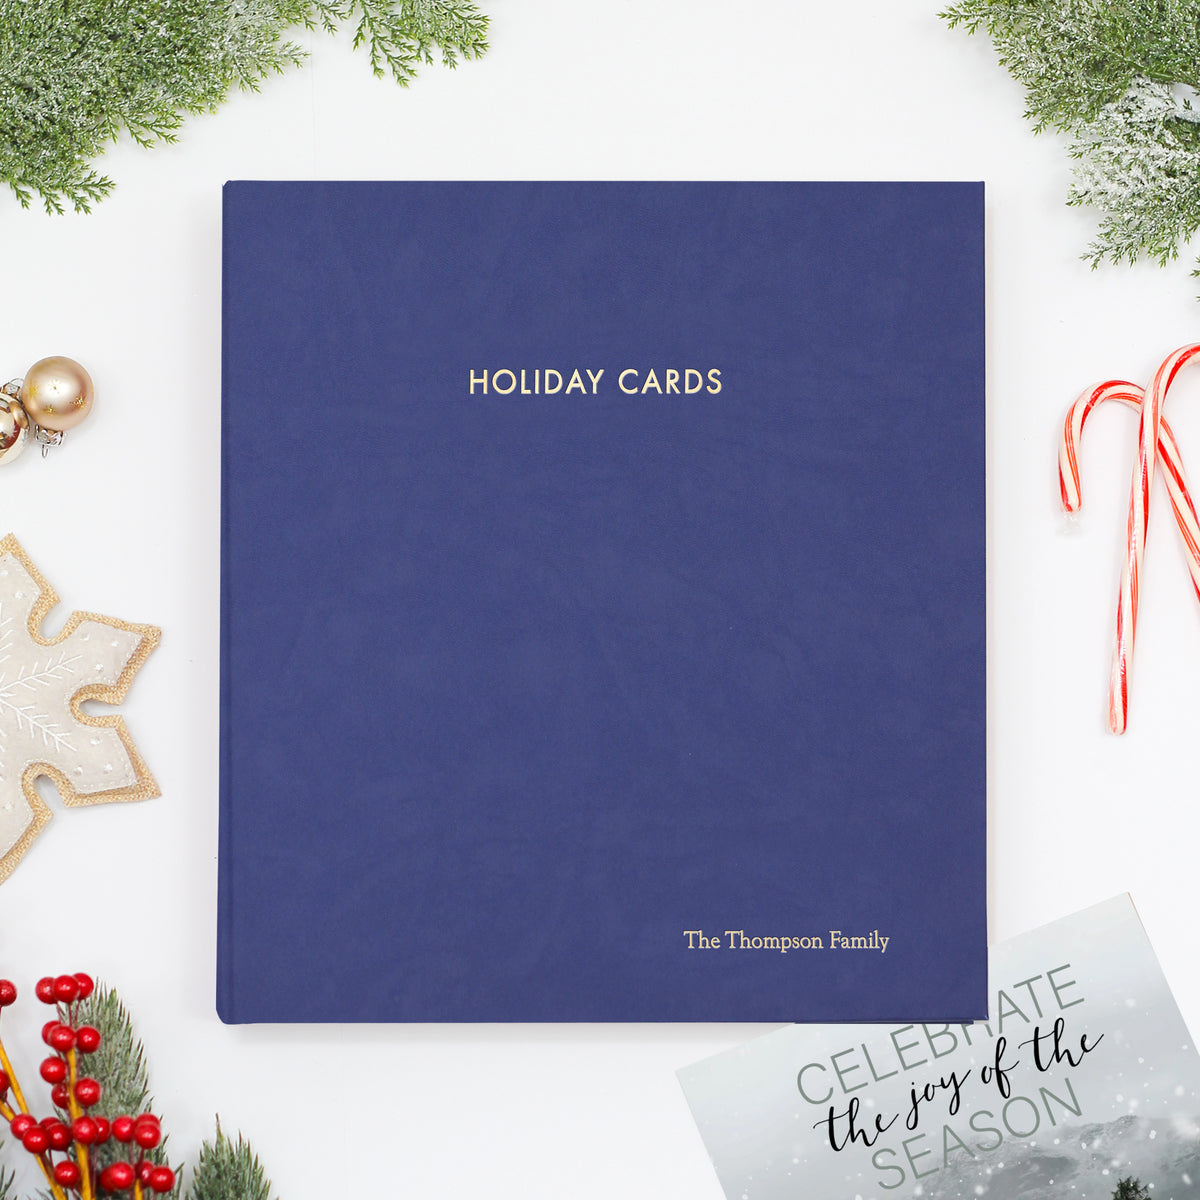 Holiday Card Album | Cover: Indigo Vegan Leather | Embossed with “Holiday Cards” | Available Personalized